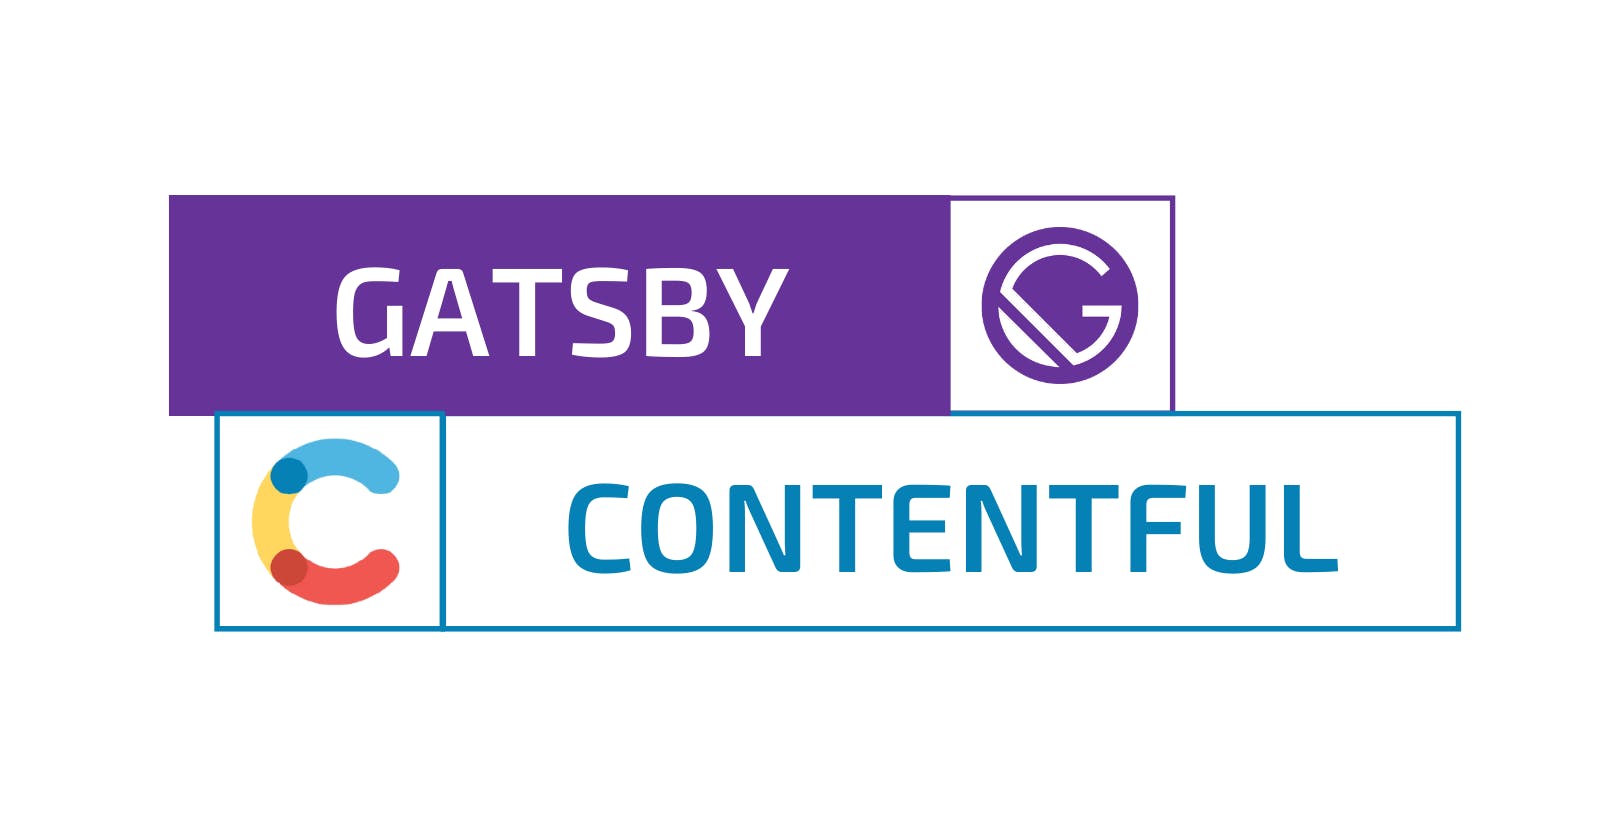 Setting up your CMS' with Gatsby - EPISODE 1: Contentful